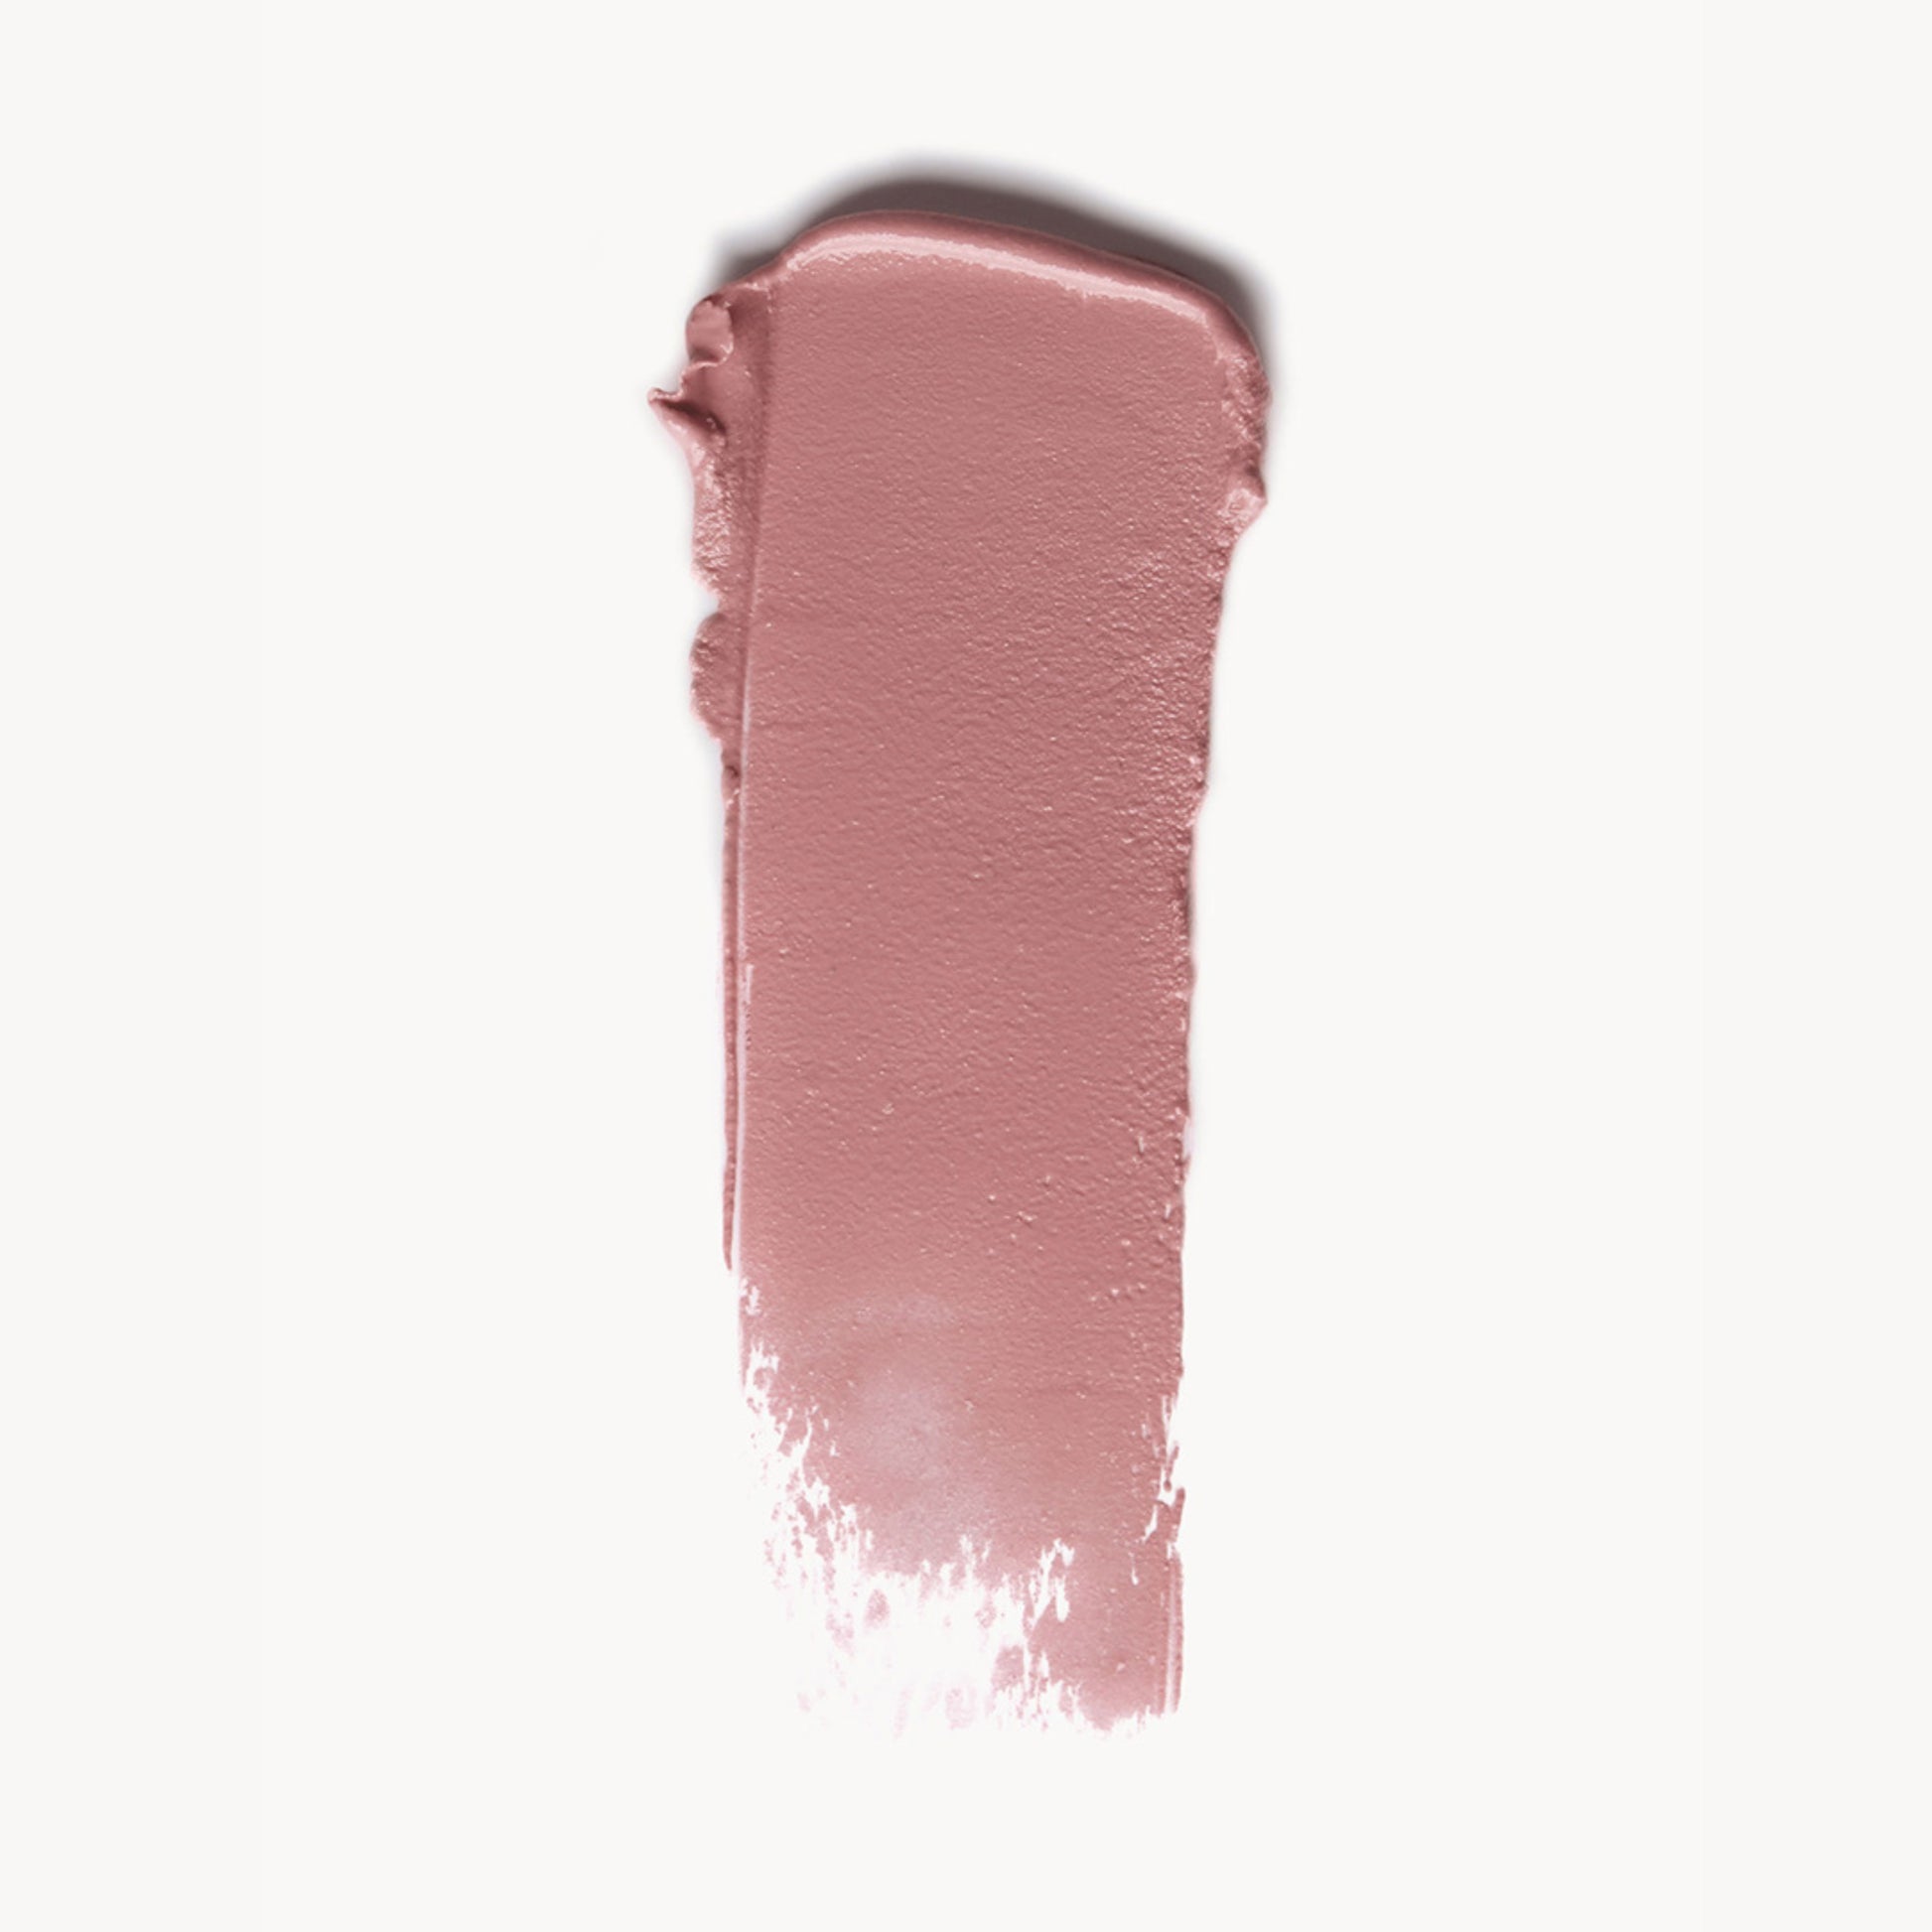 A wipe of plummy taupe cream blush on a white background